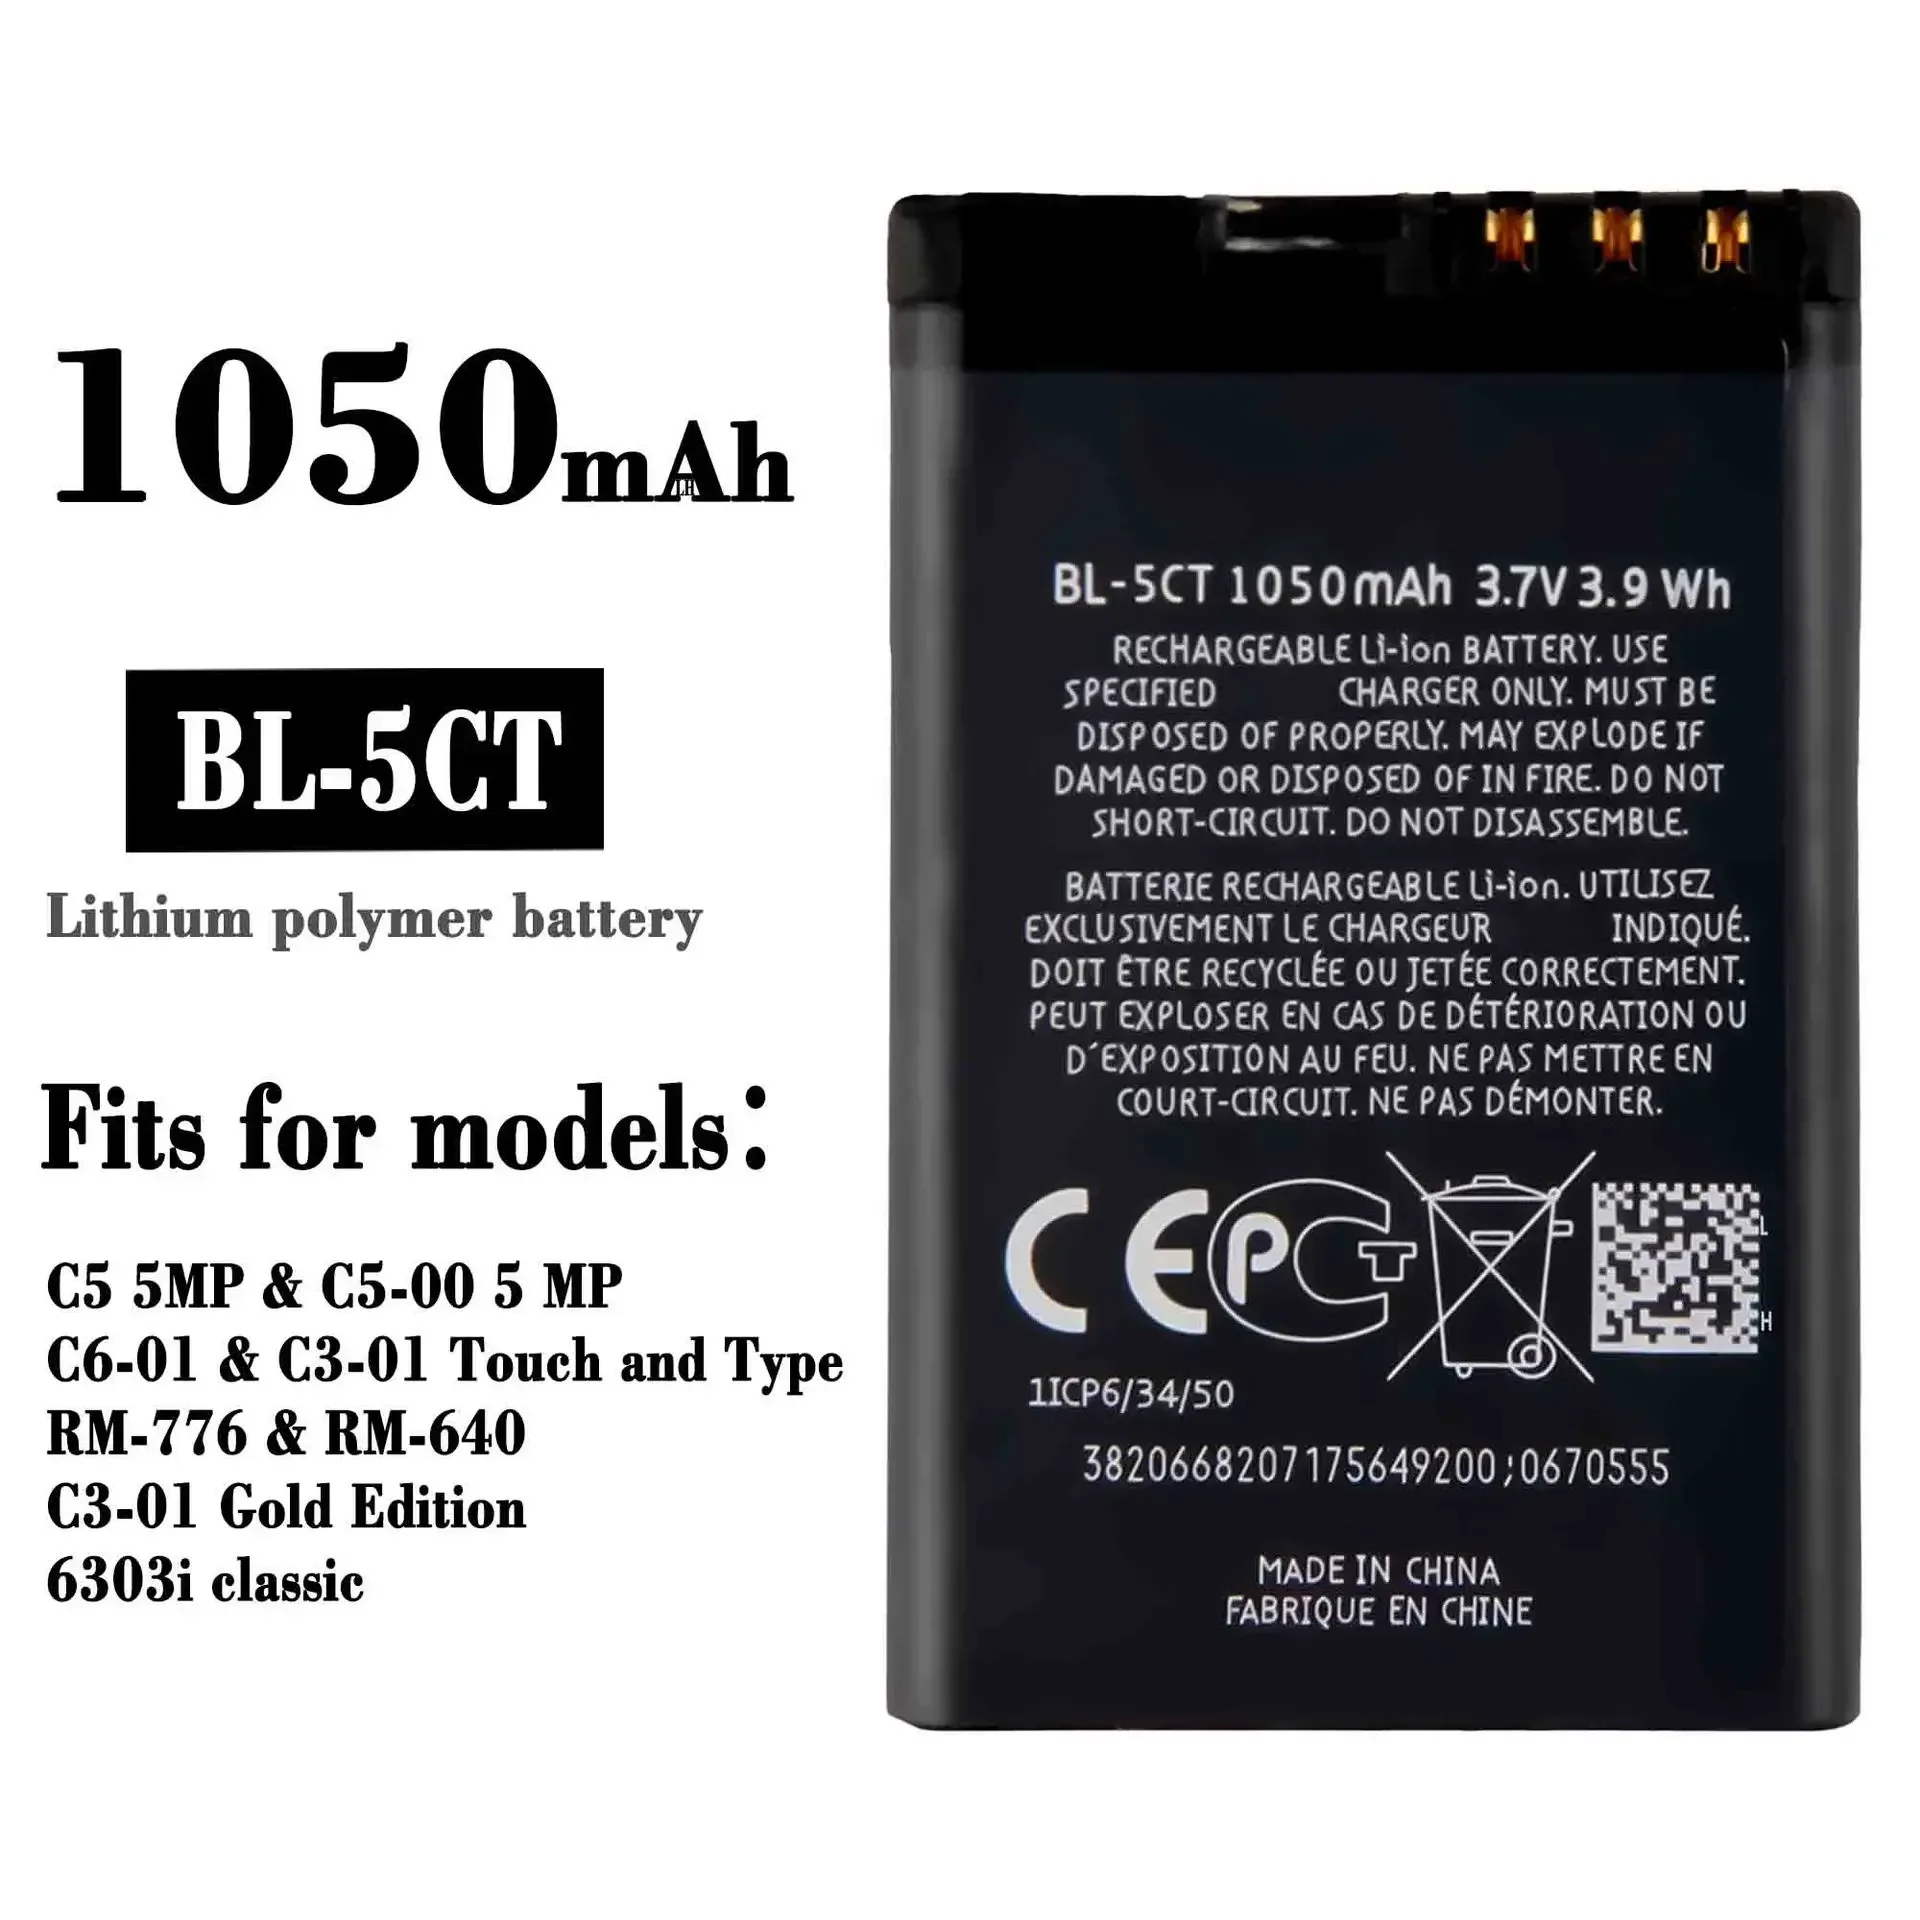 

BL-5CT Mobile Phone Replacement Battery For Nokia C5 5MP C6-01 RM-776 RM-640 BL-5CT High Quality Built-in Battery